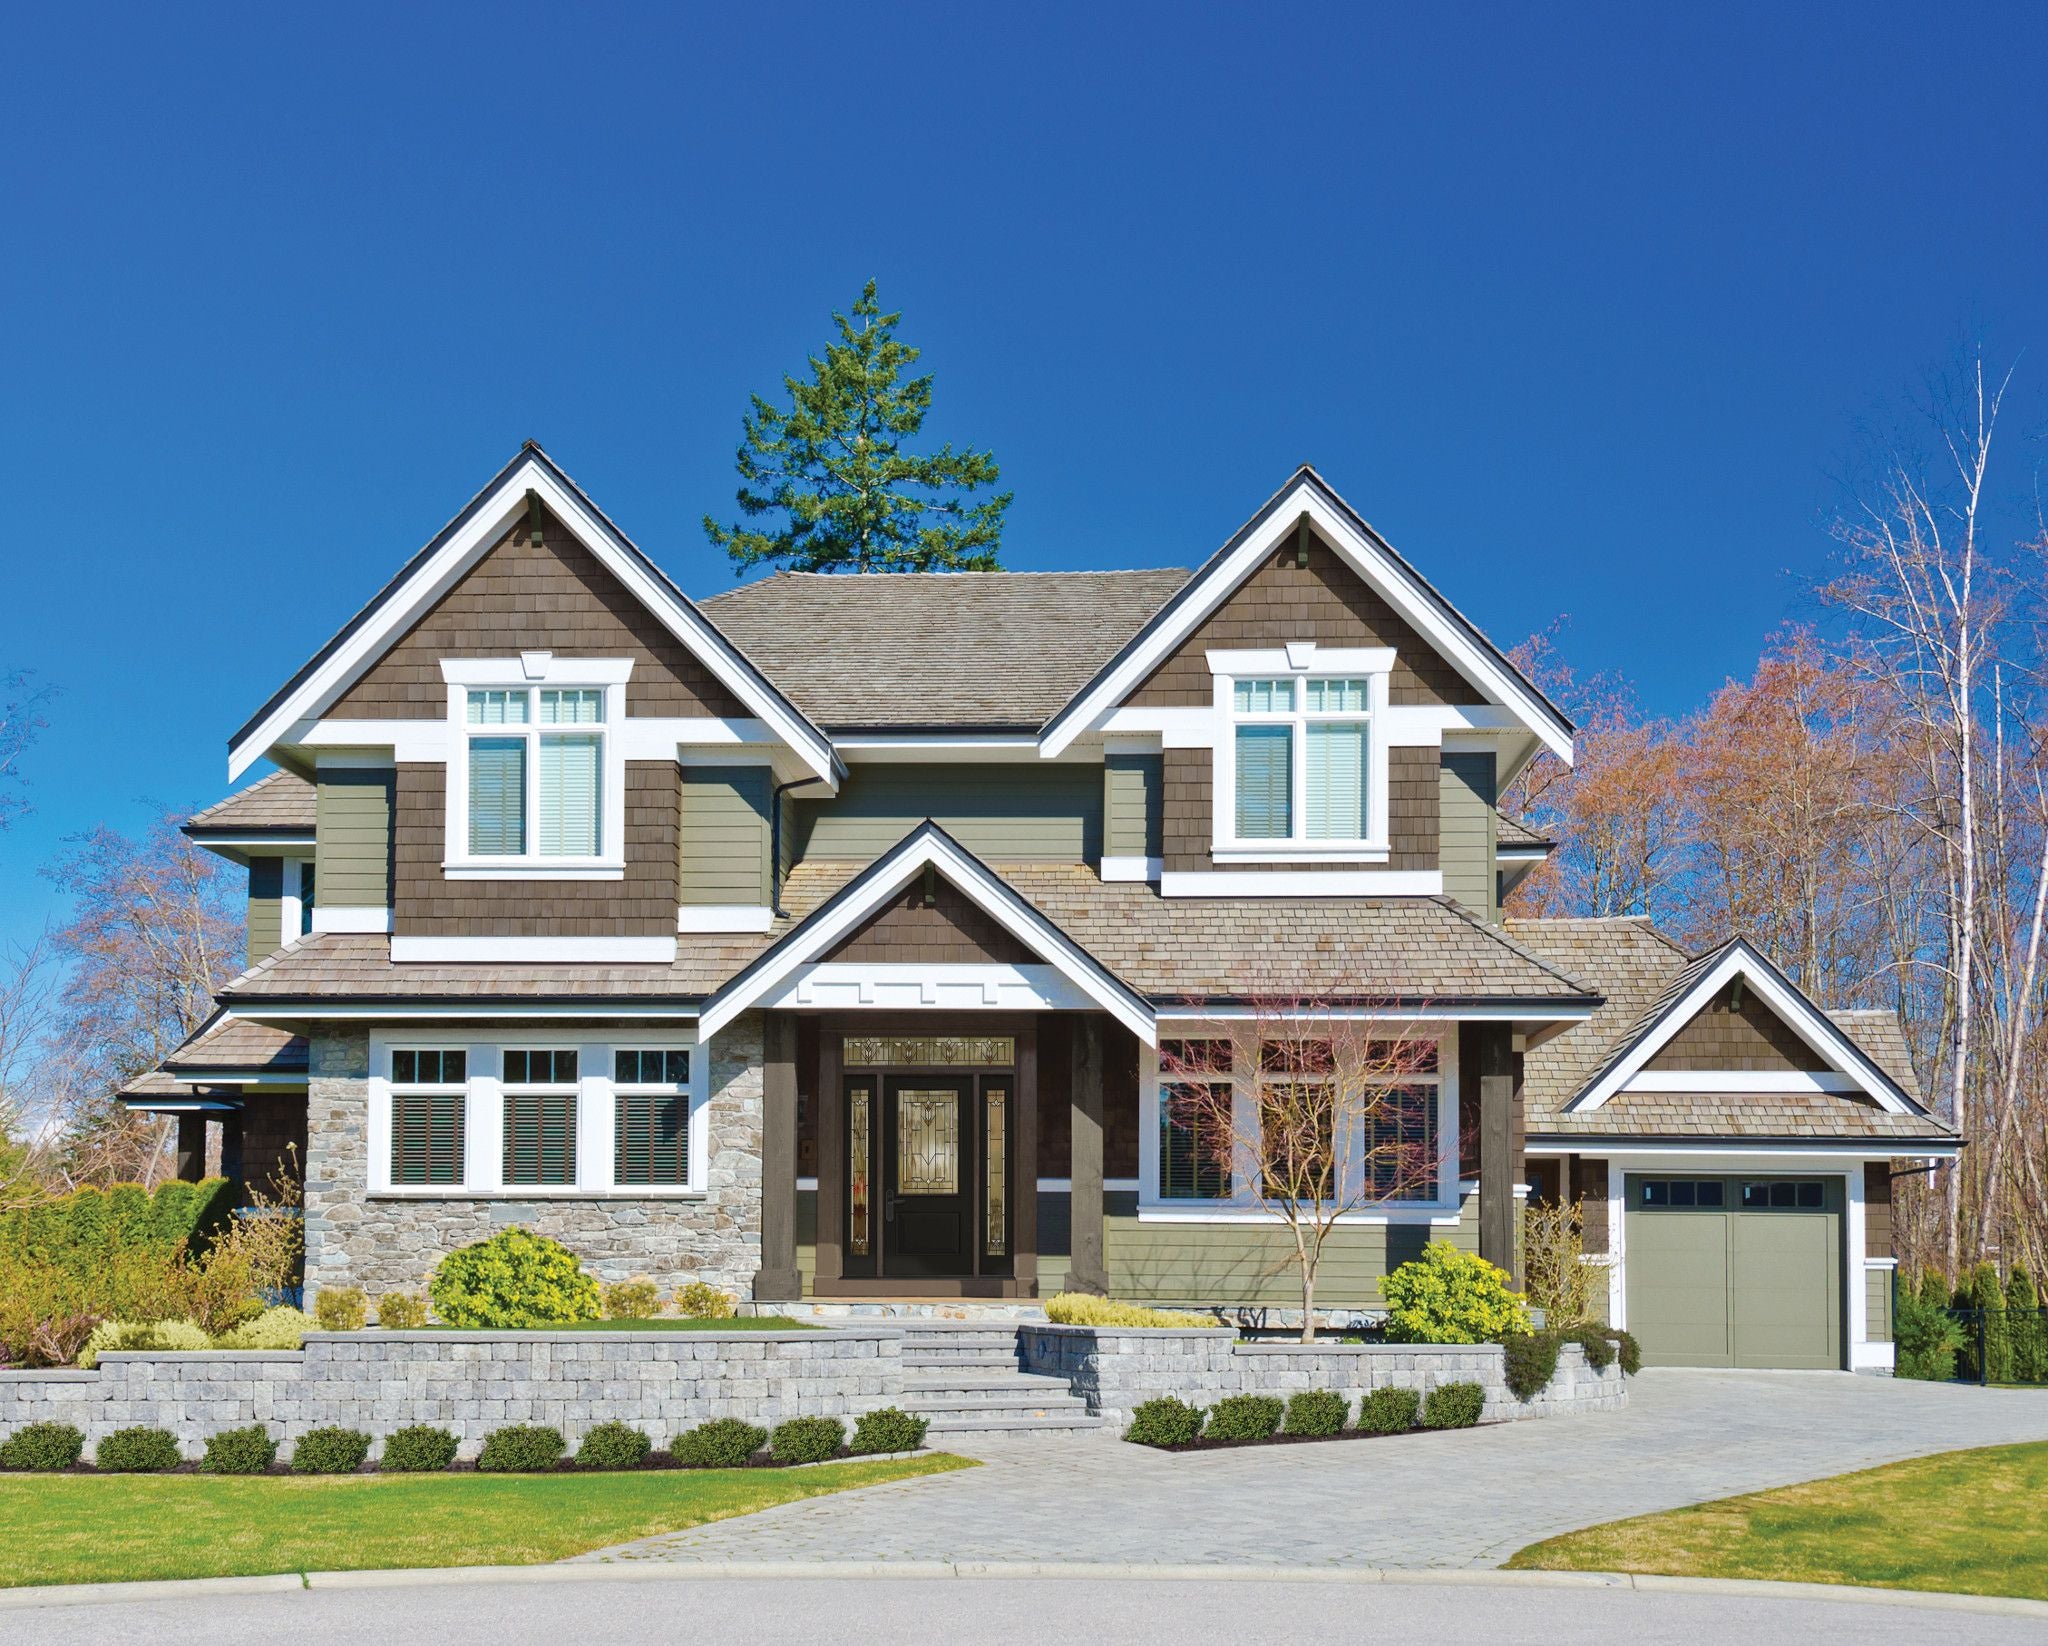 This two-story home has green, brown and stone siding with white trim.